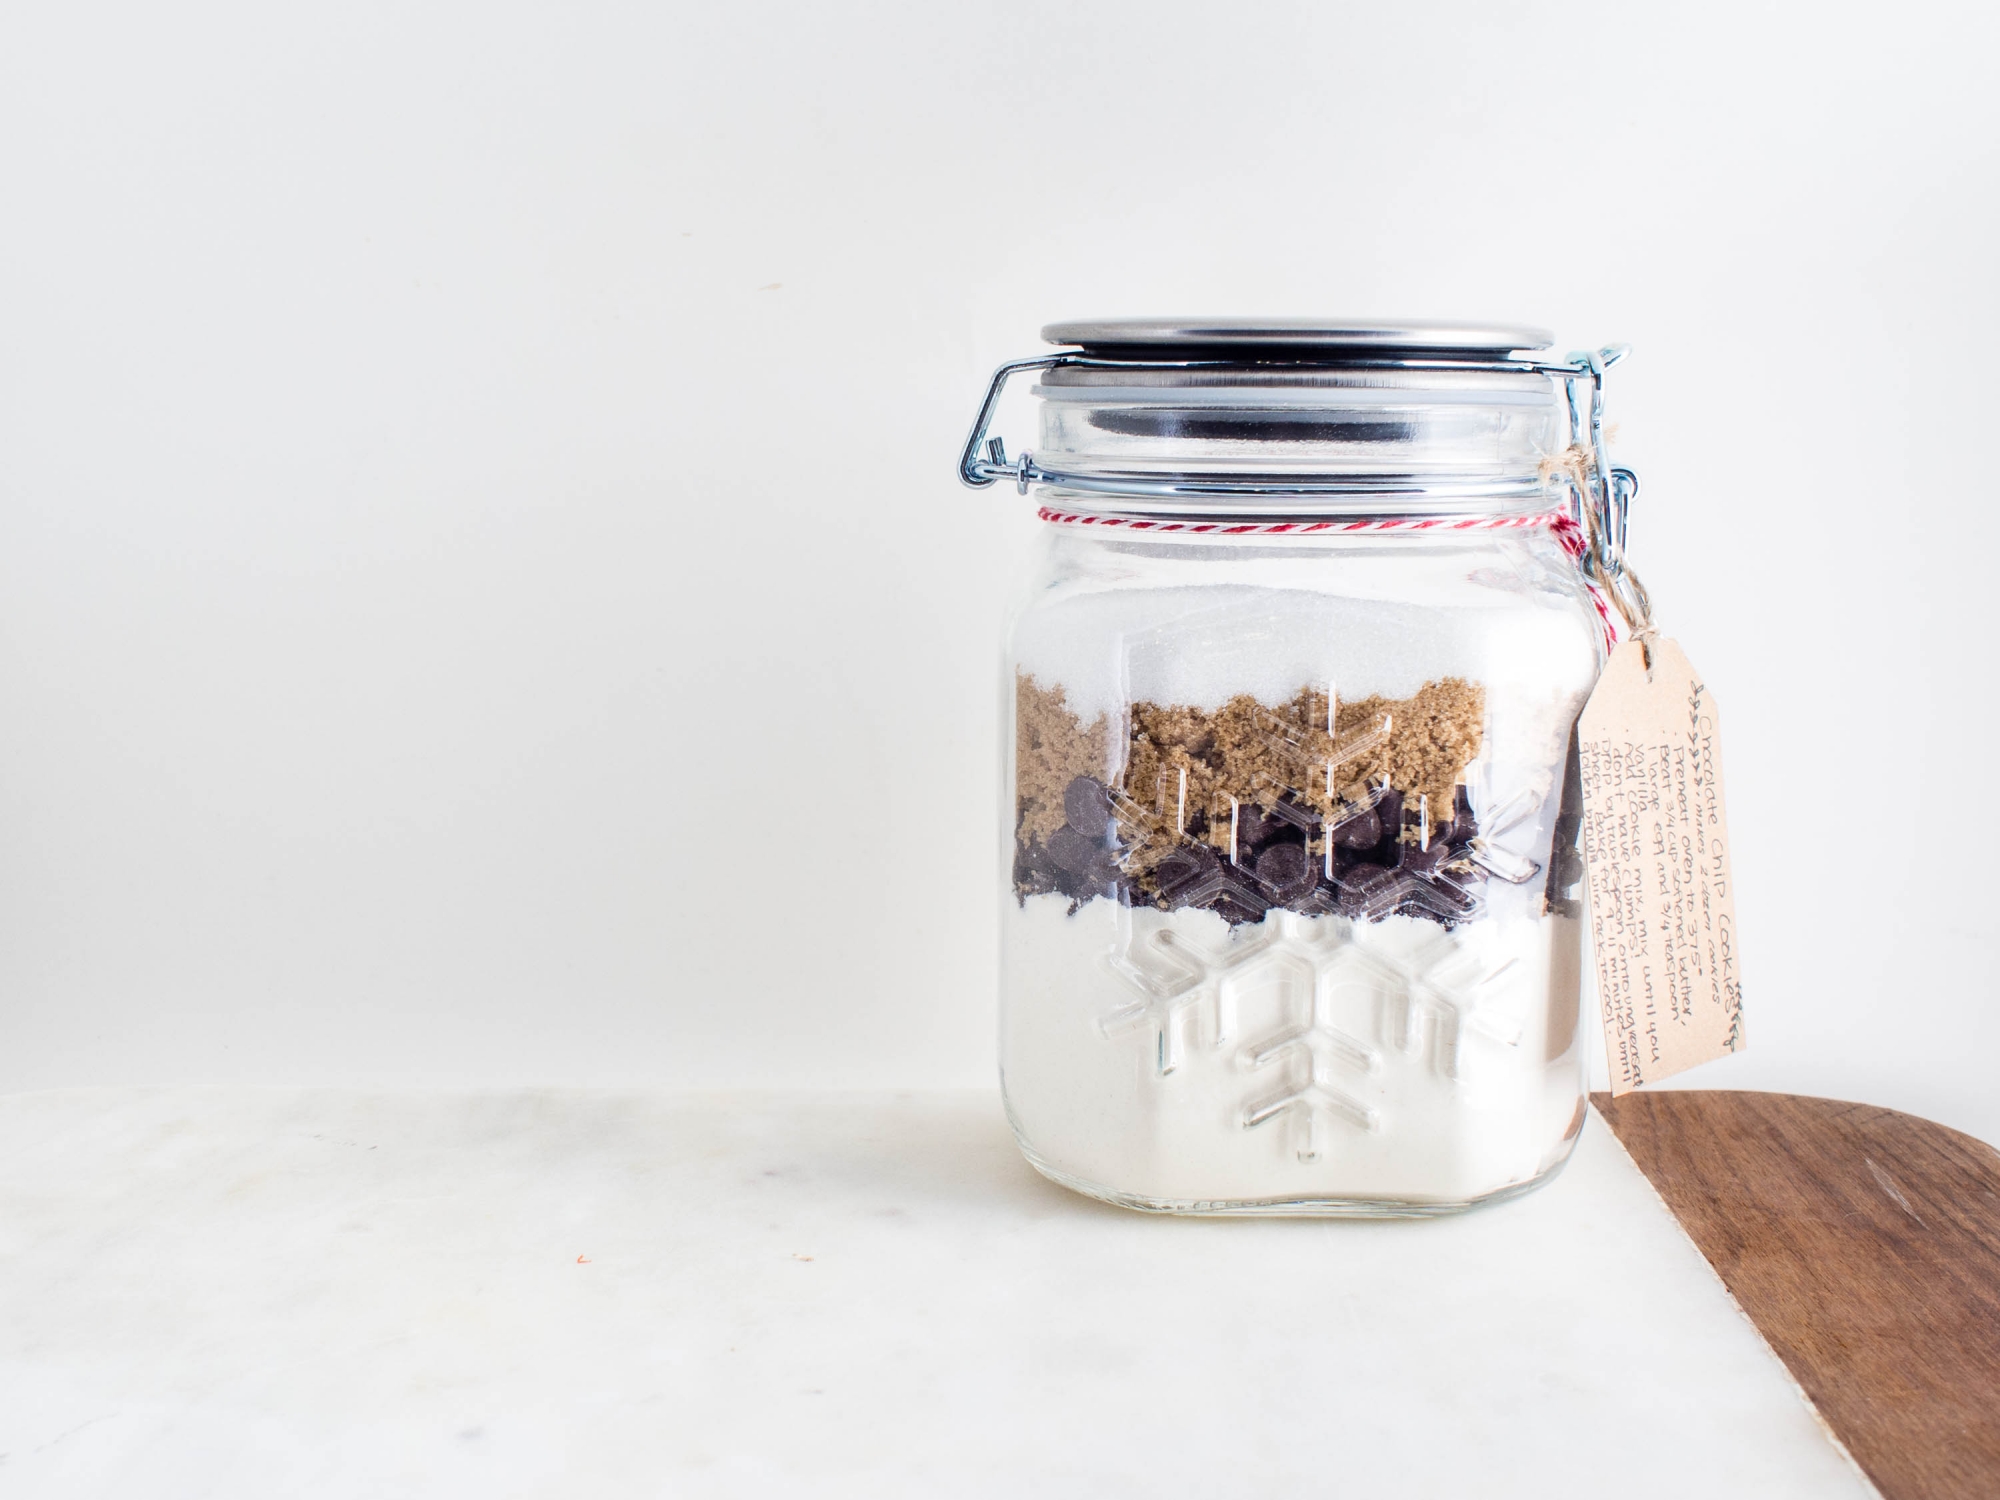 Thankful Cookies in a Jar - Mason Jar Cookies for those you're thankful for